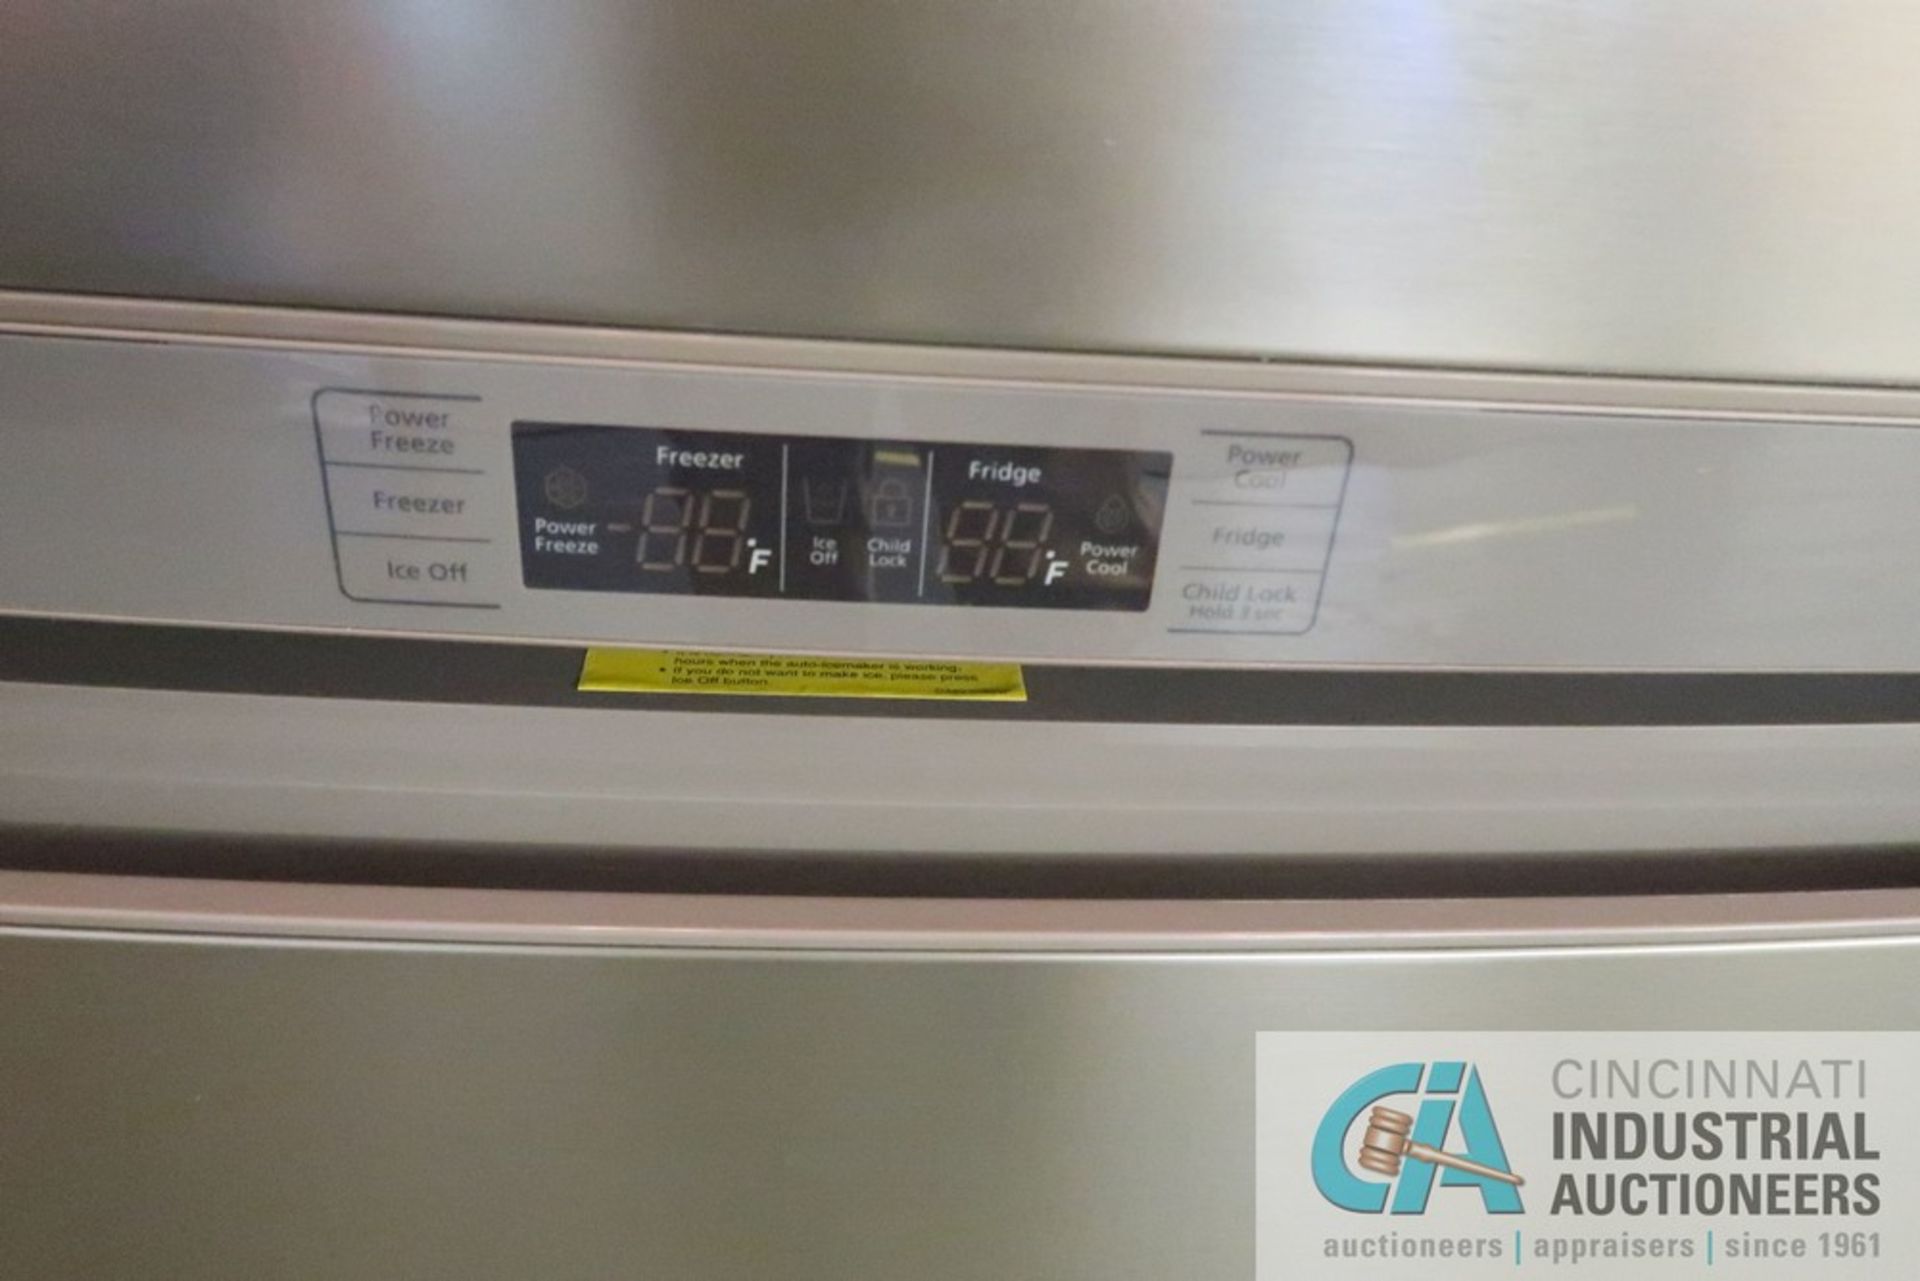 STAINLESS STEEL REFRIGERATOR, SAMSUNG MODEL RB195ACPN WITH ICE MAKER - Image 2 of 4